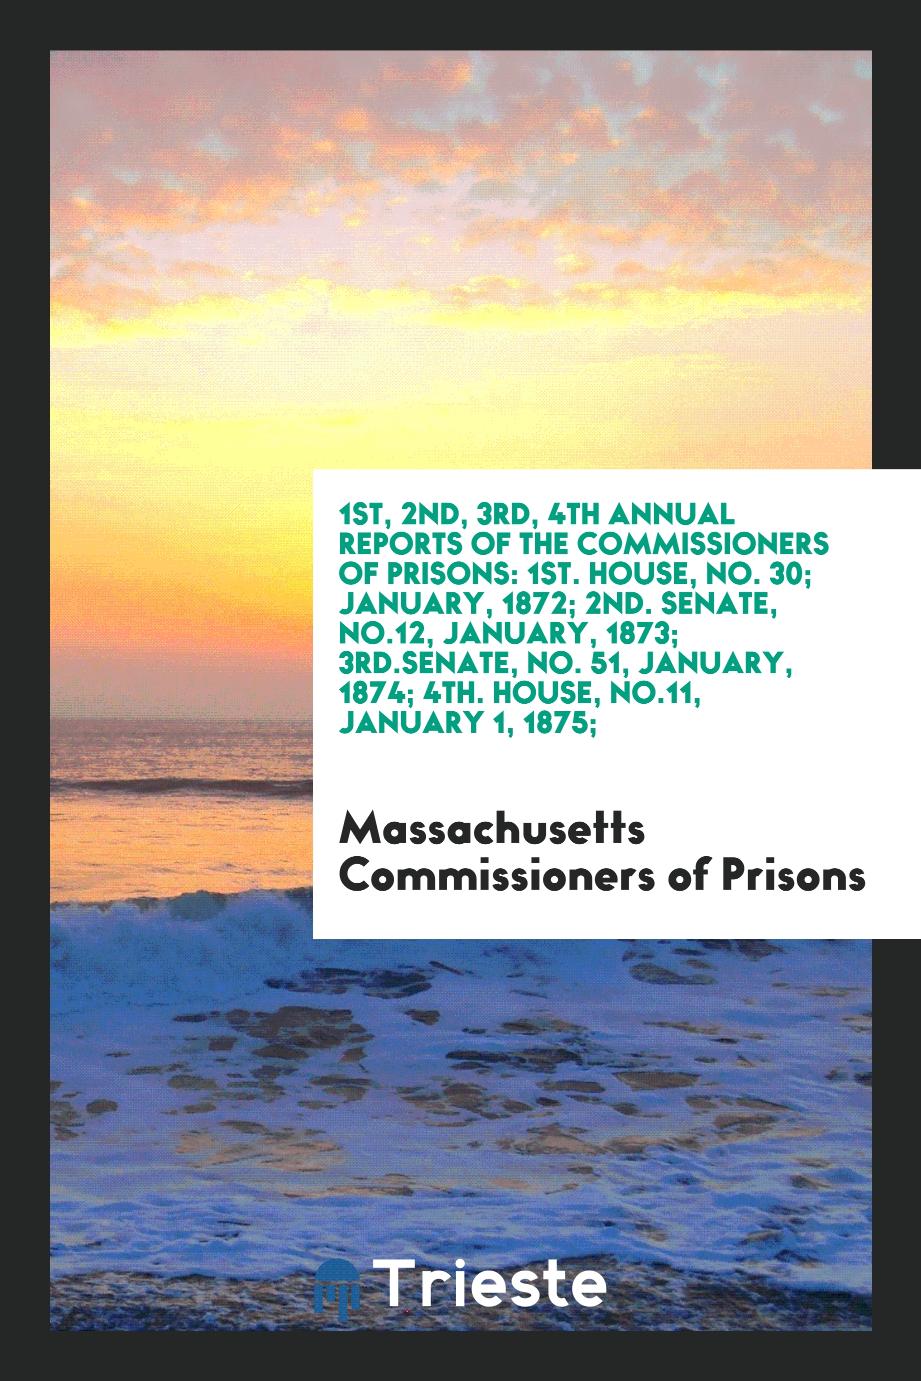 1st, 2nd, 3rd, 4th Annual Reports of the Commissioners of Prisons: 1st. House, No. 30; January, 1872; 2nd. Senate, No.12, January, 1873; 3rd.Senate, No. 51, January, 1874; 4th. House, No.11, January 1, 1875;